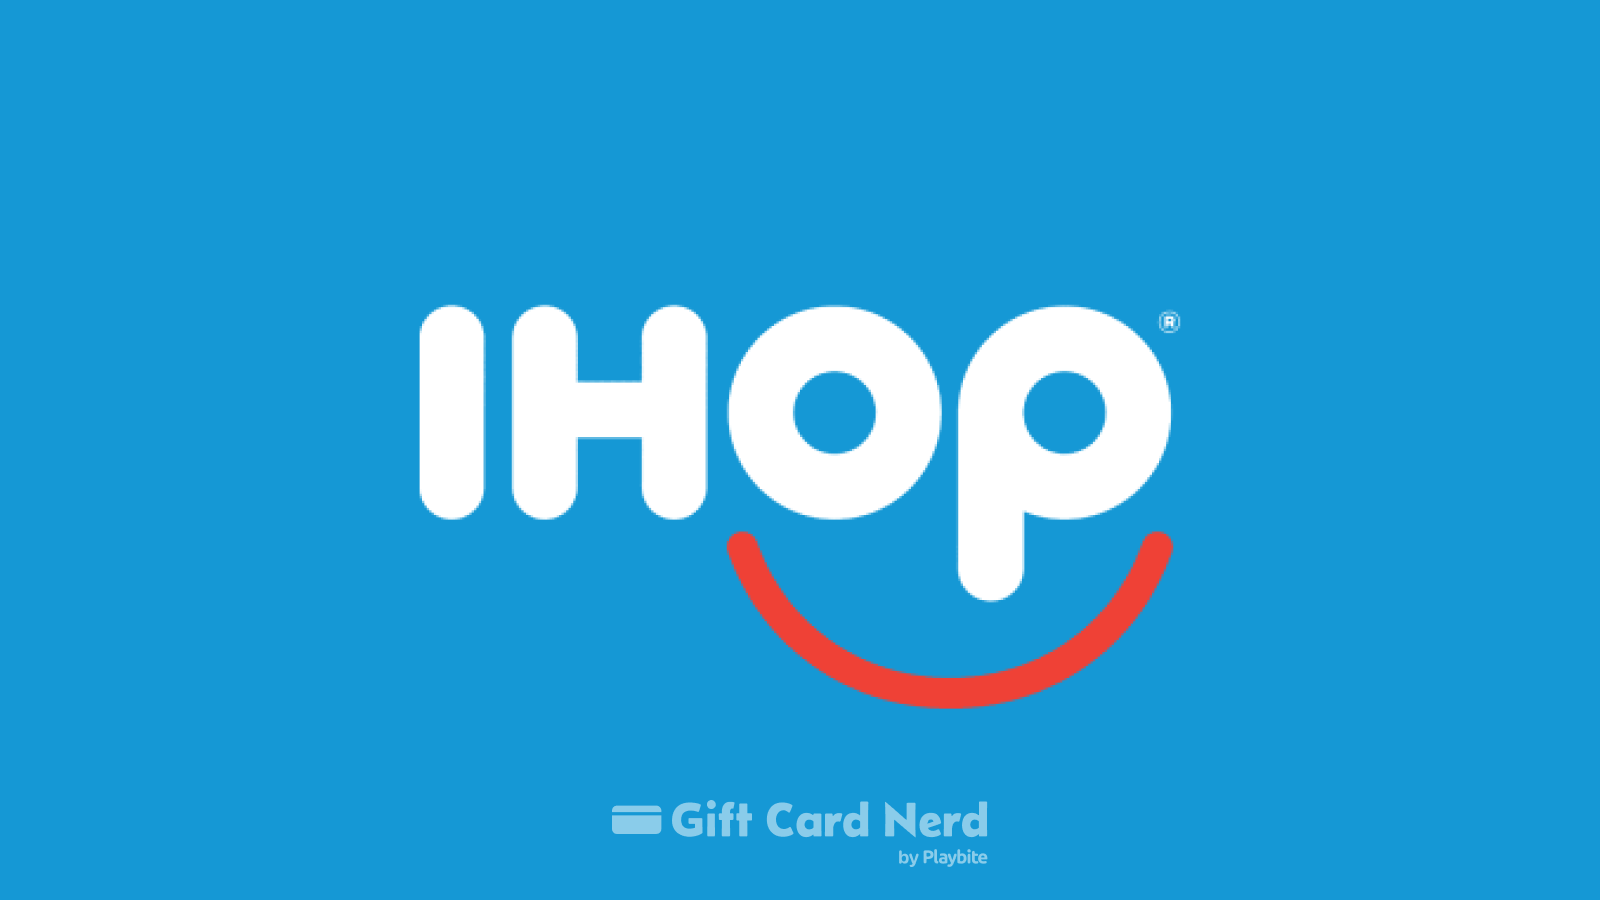 Can I Use an IHOP Gift Card on Steam?